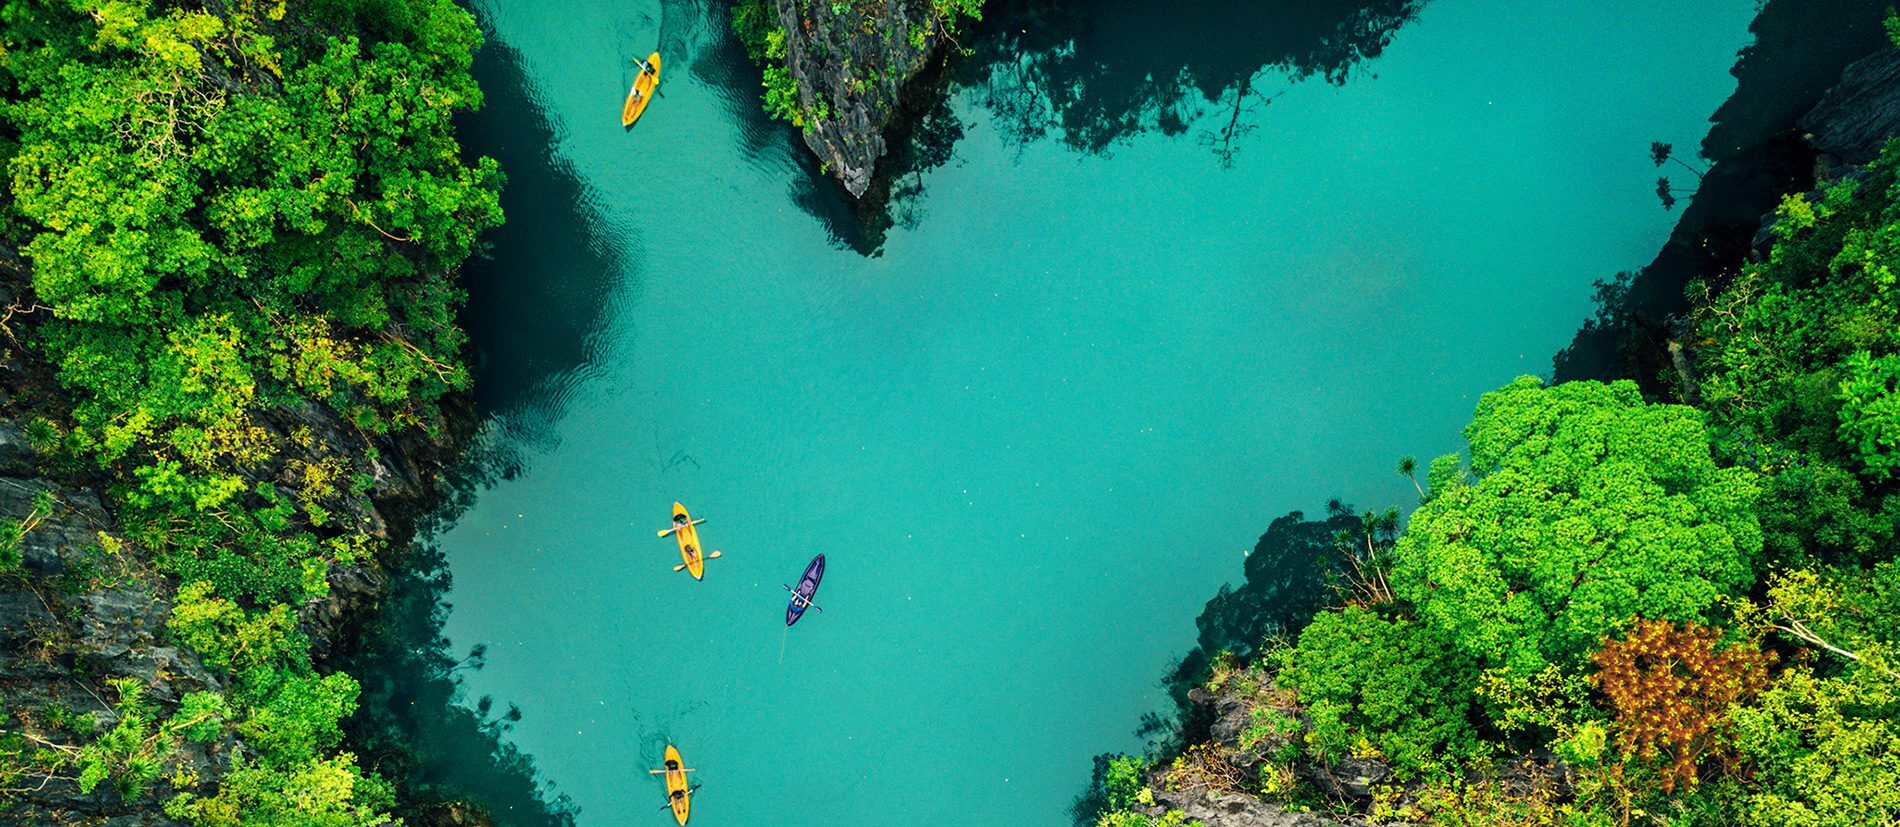 A canyon of bright green foliage and blue water with kayaks showing the power of sustainable development in the Philippines